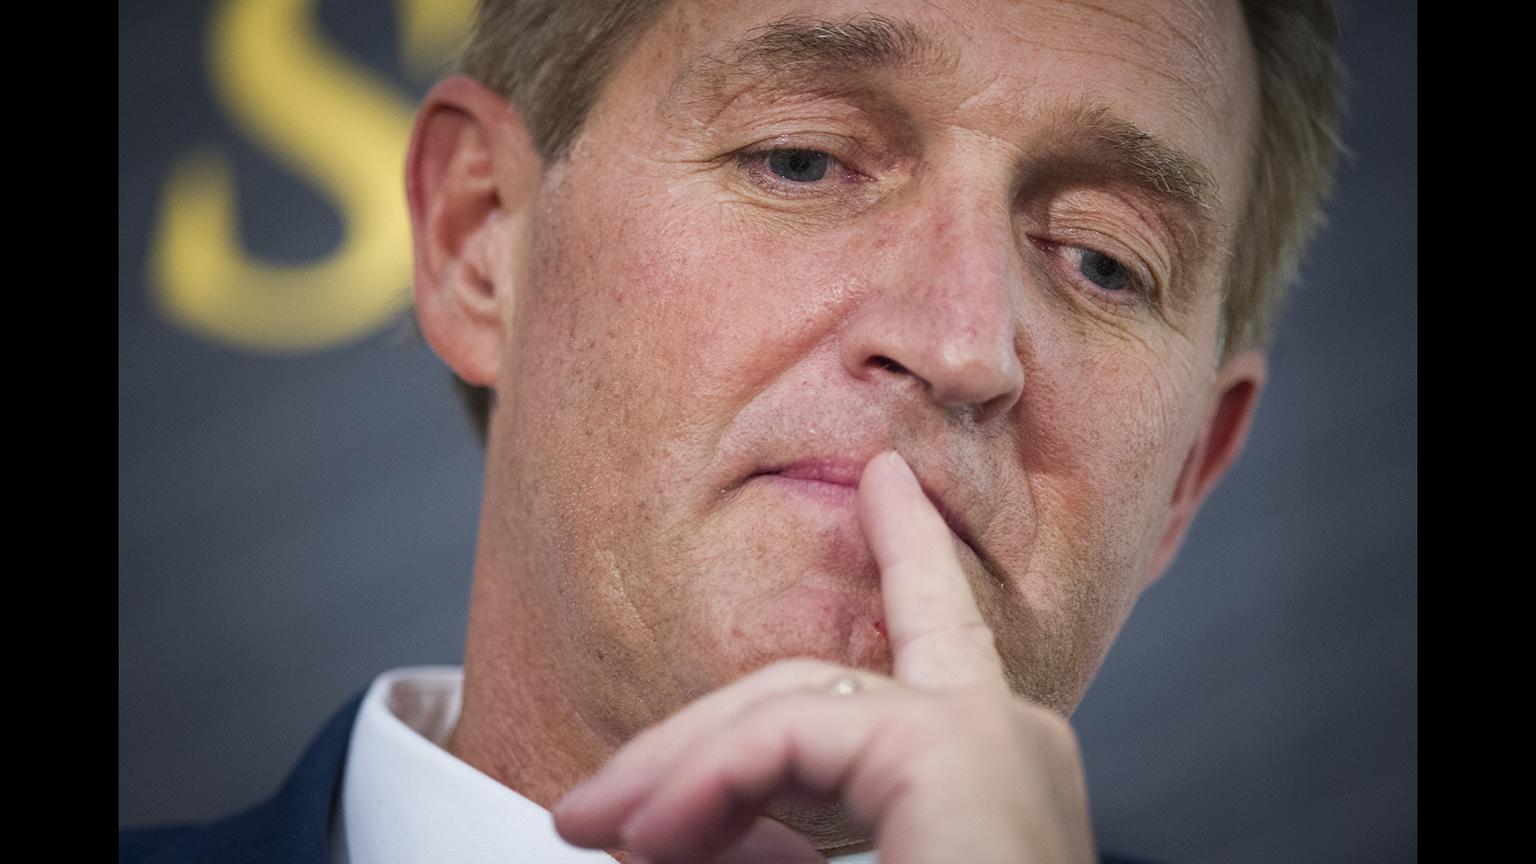 In this Oct. 2, 2018 file photo, Sen. Jeff Flake, R-Ariz. participates in an interview at The Atlantic's “The Constitution in Crisis” forum in Washington. (AP Photo / Cliff Owen, File)